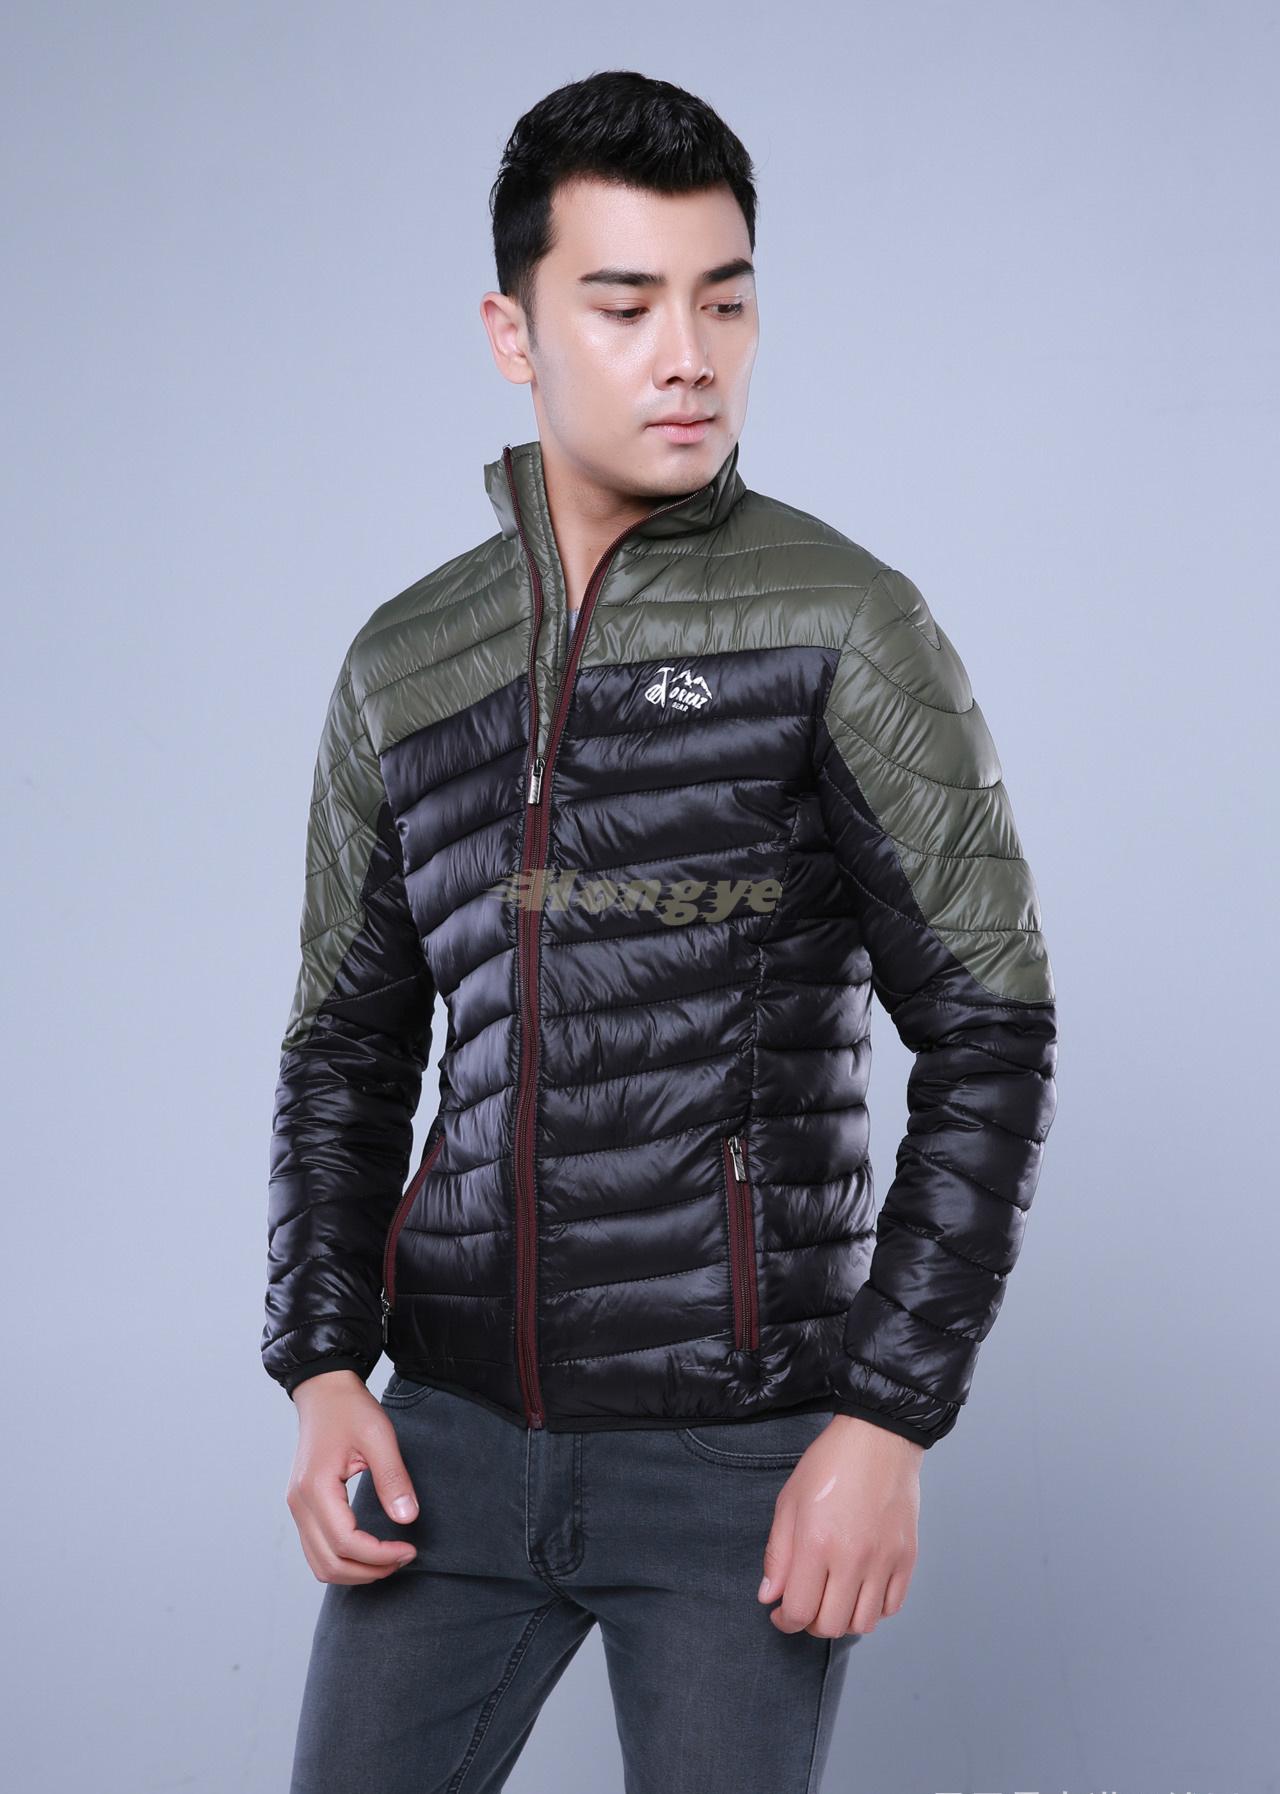 NEW 2015 Winter Men s Clothes Brand Men Down Jackets Cotton Contrast Color Mens Wadded Jacket